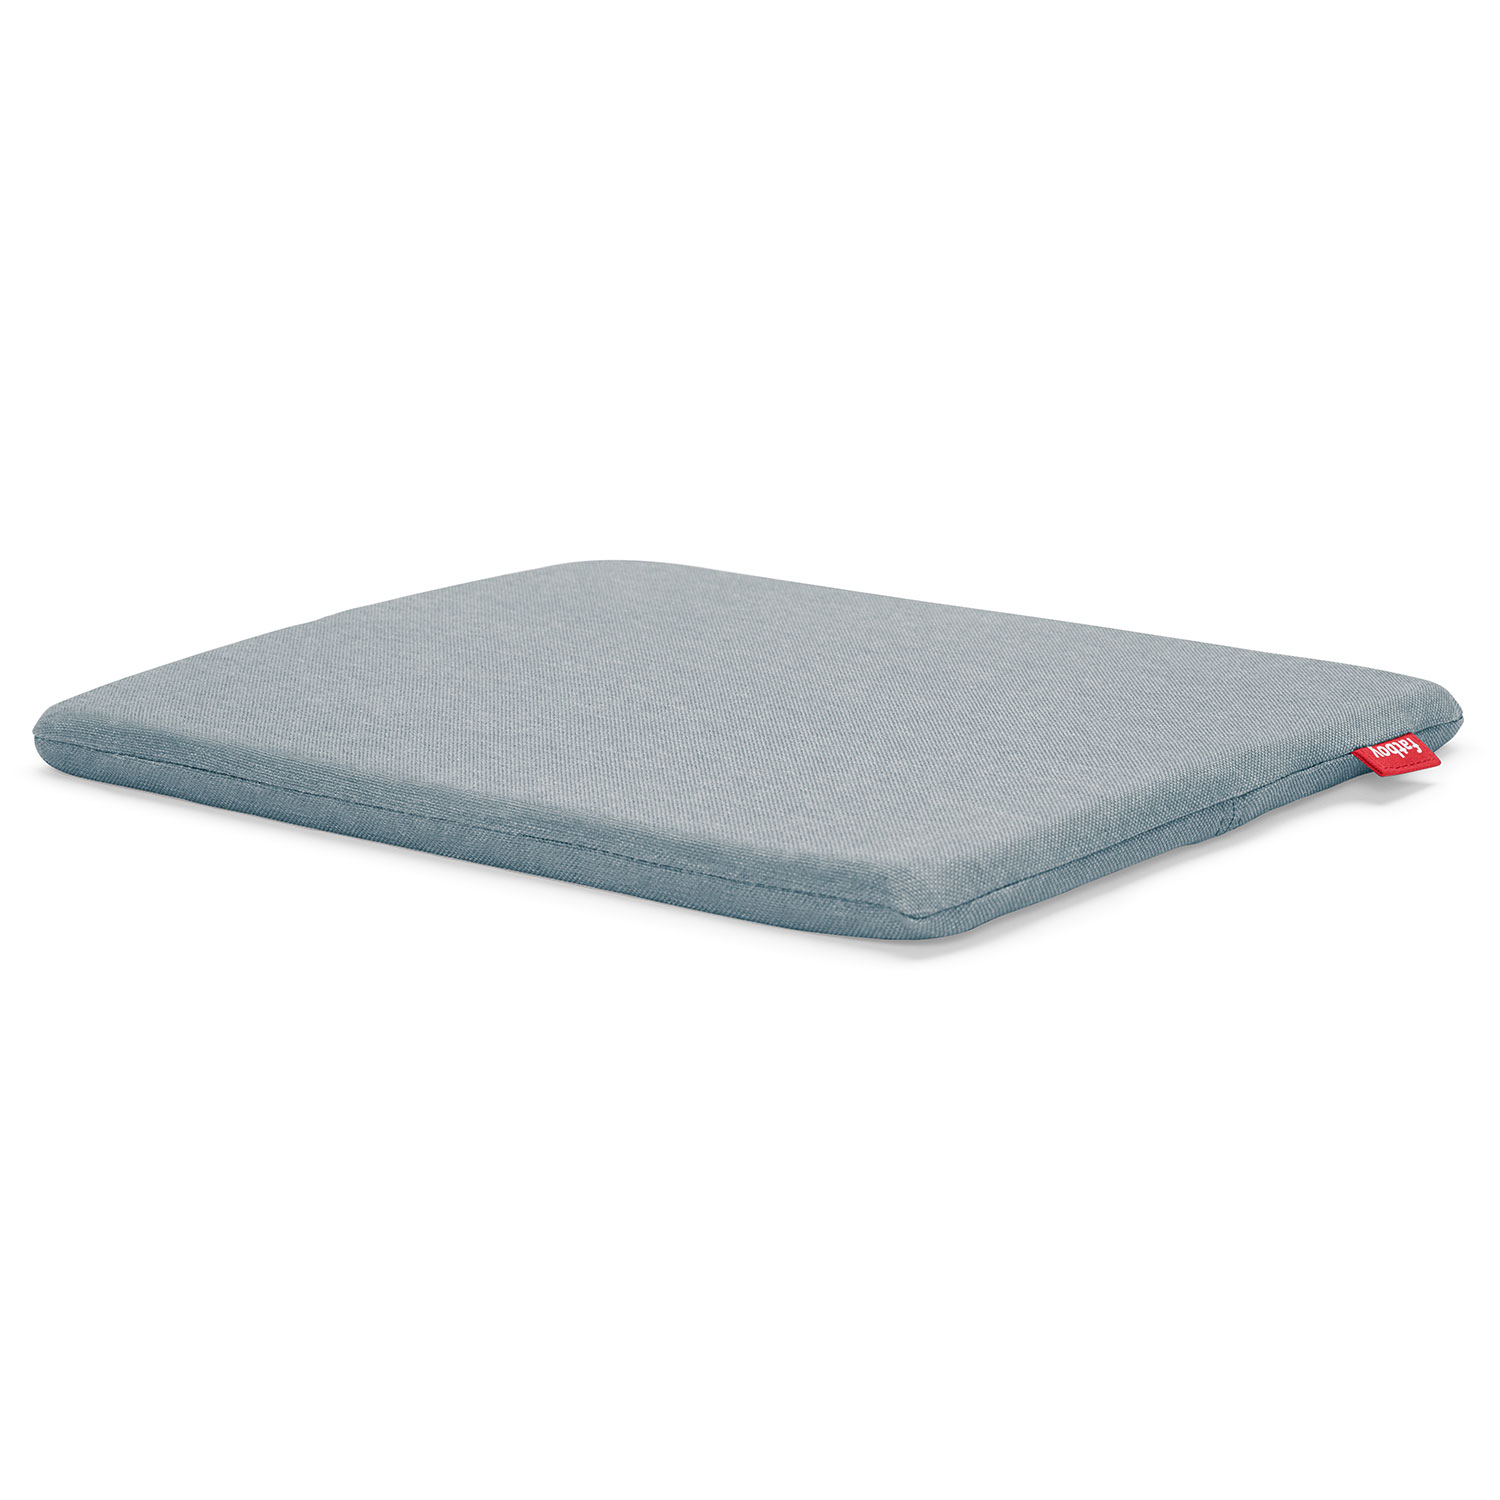 Fatboy Concrete seat pillow recycled storm blue